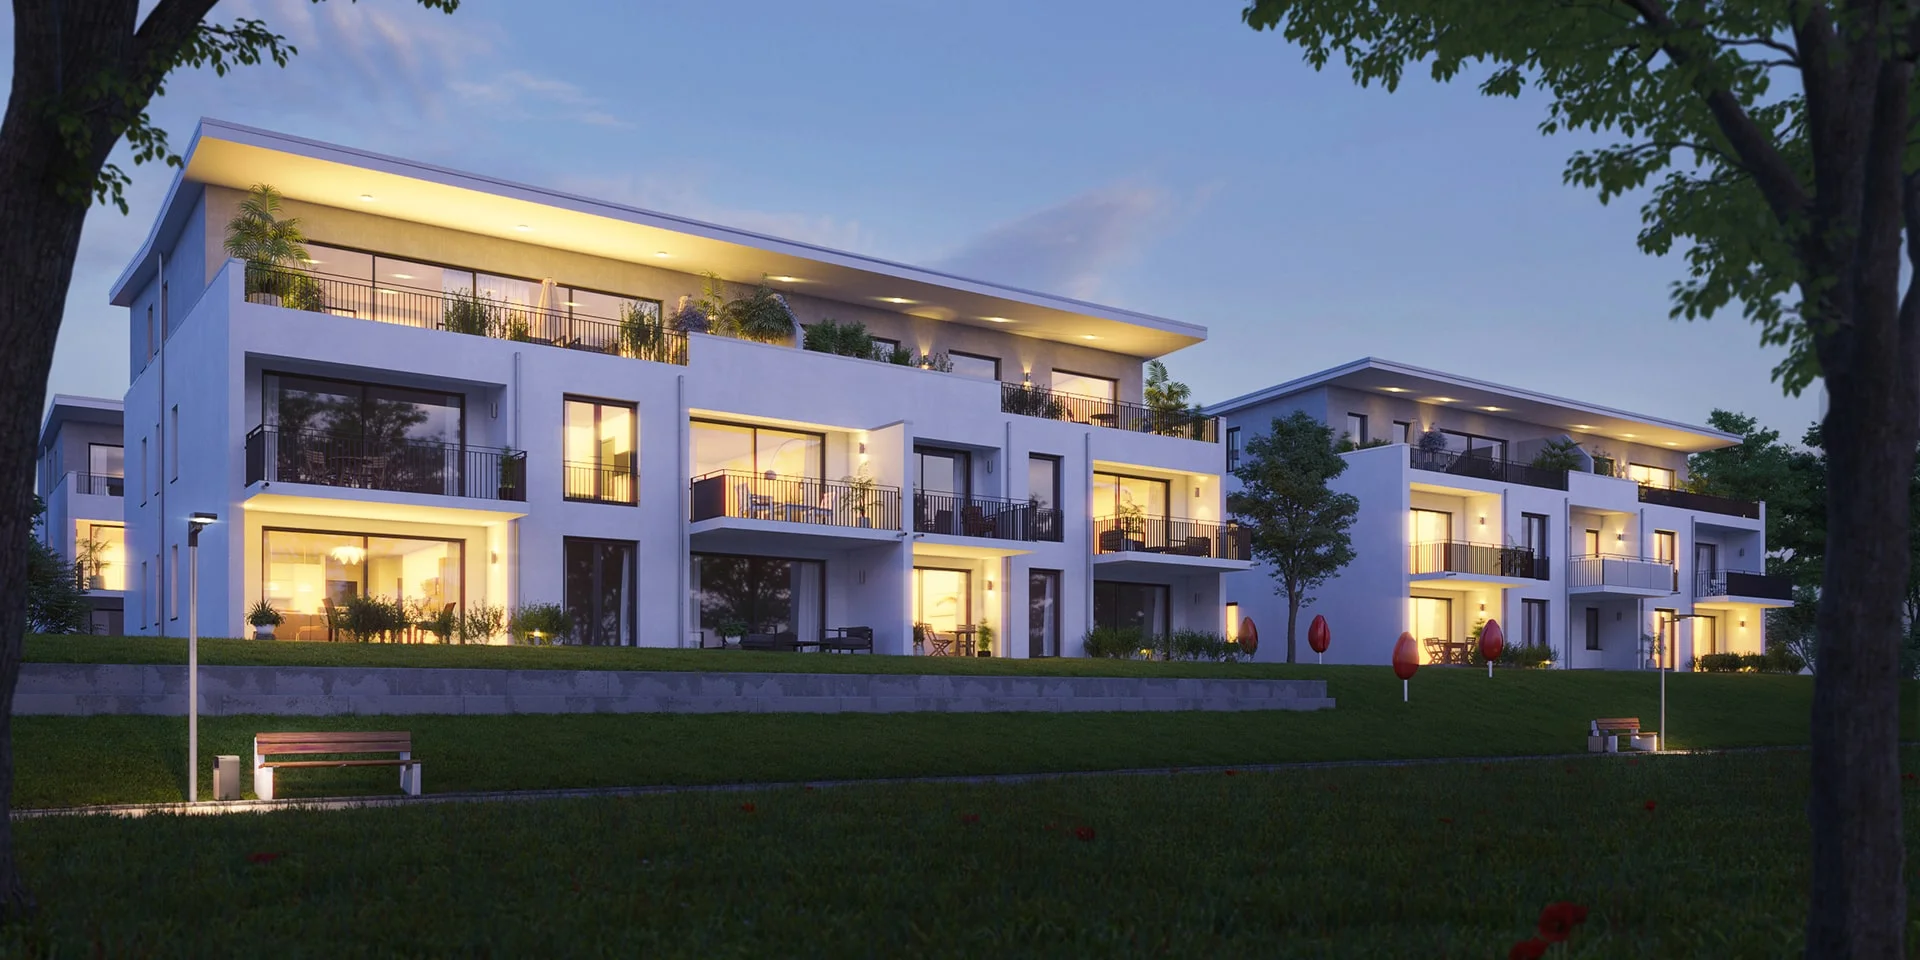 Architectural visualization. Multi-family houses. Night view